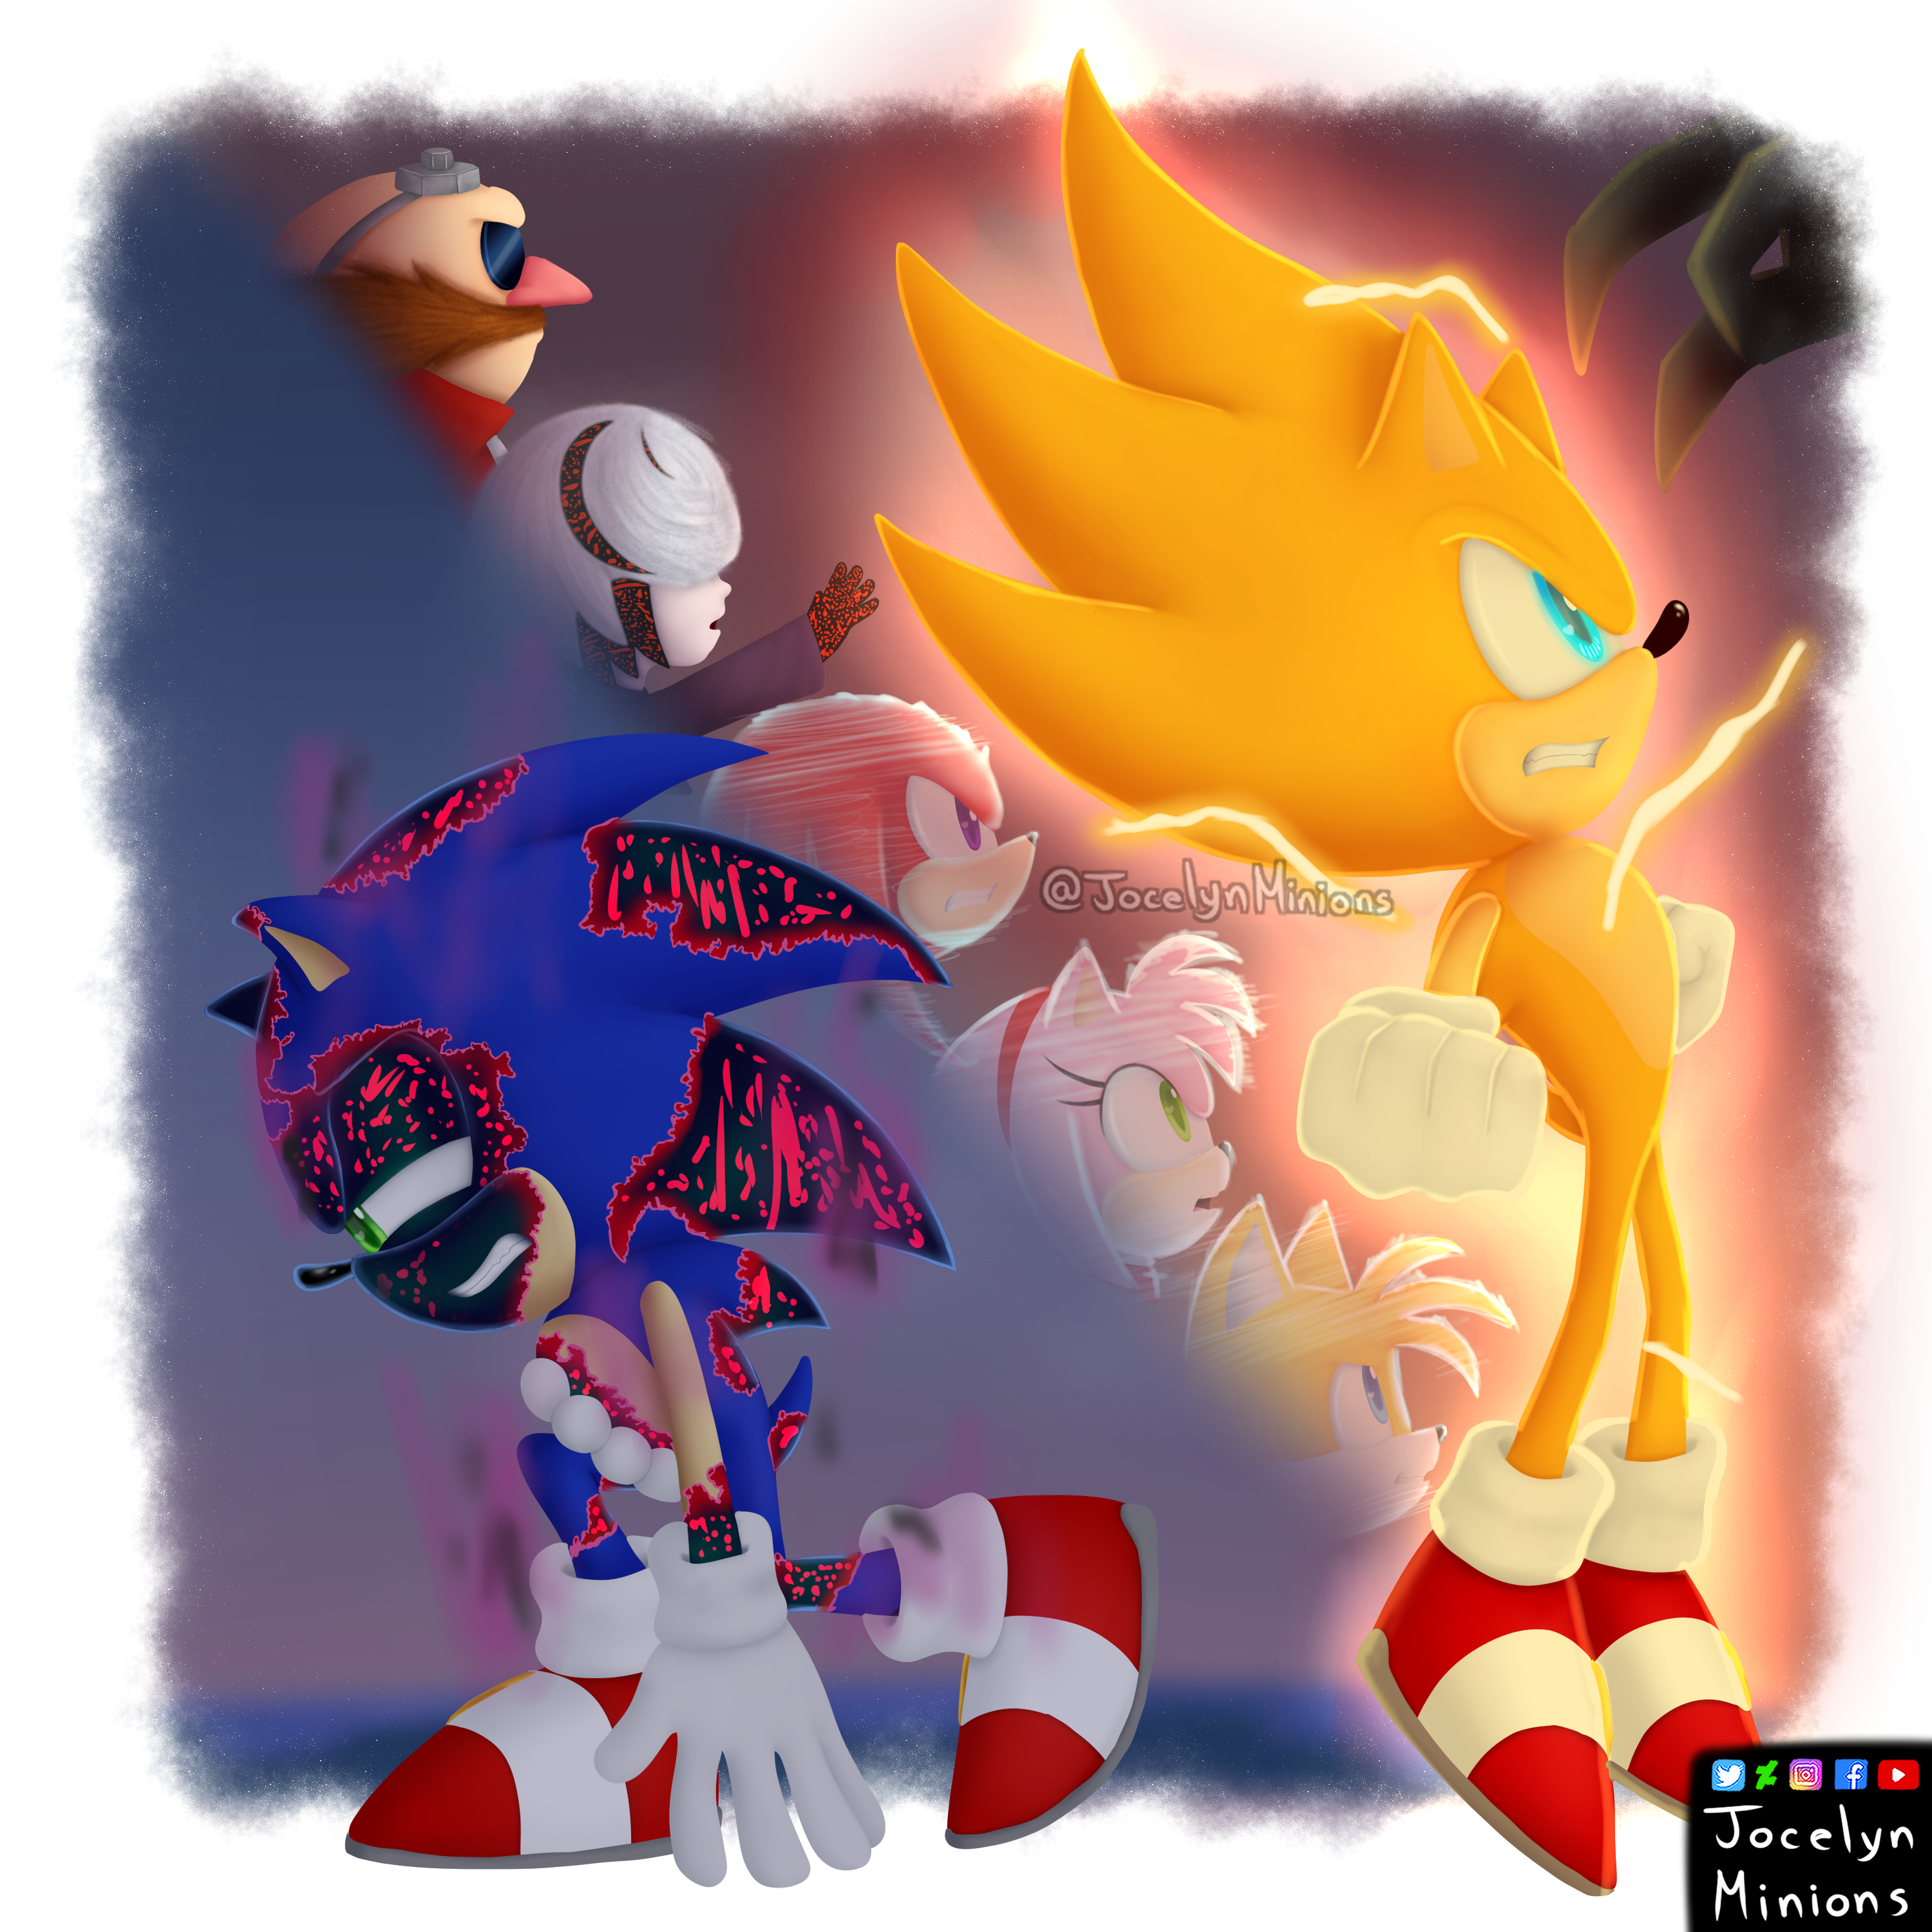 Sonic Frontiers the final horizon by Patrick2002 on DeviantArt